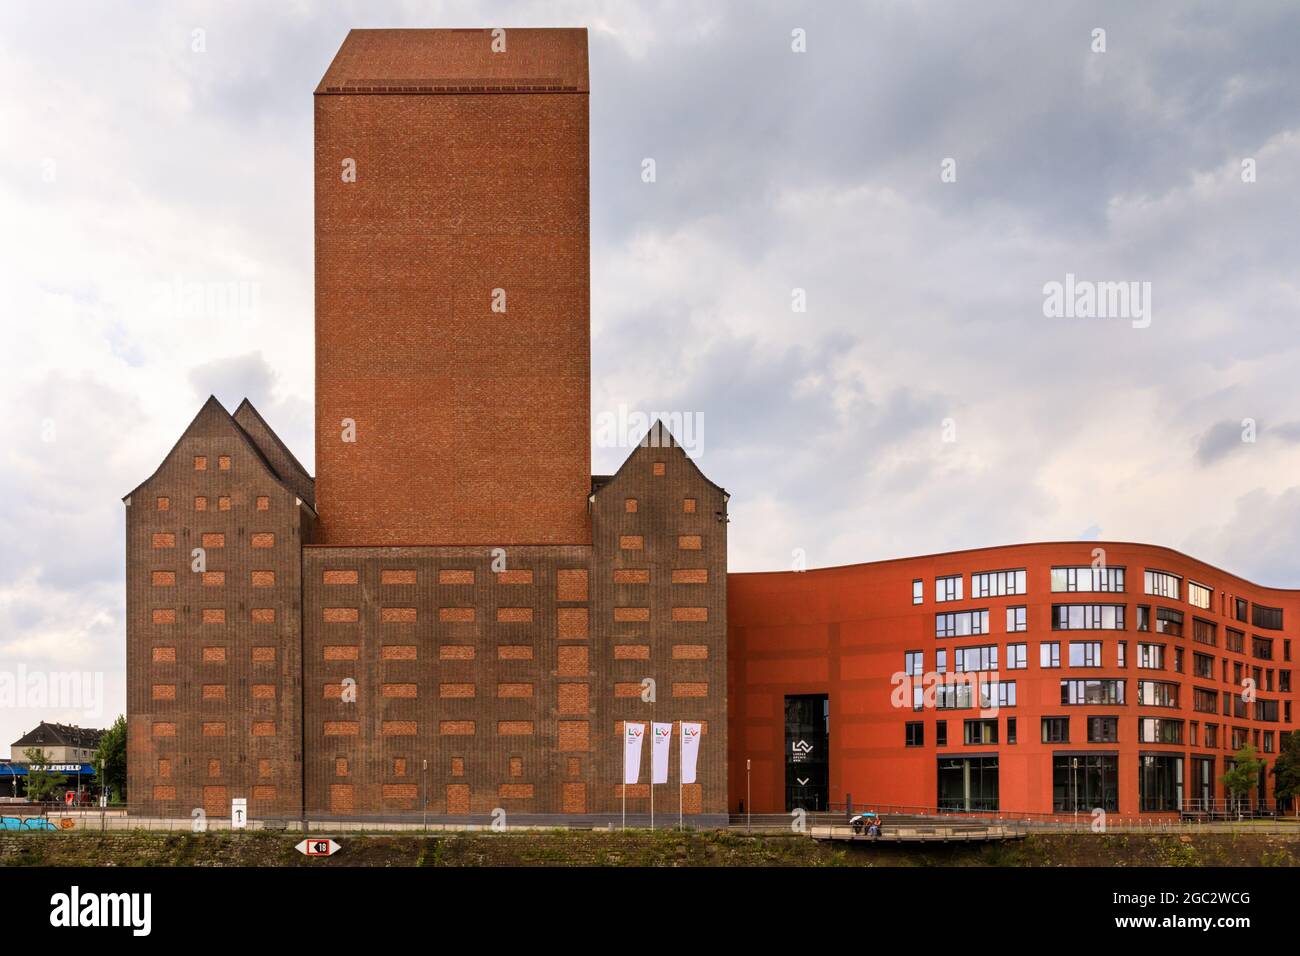 Landesarchiv NRW, historic granary building now the NRW State Archive Department Rheinland, Inner Harbour, Duisburg, Germany Stock Photo